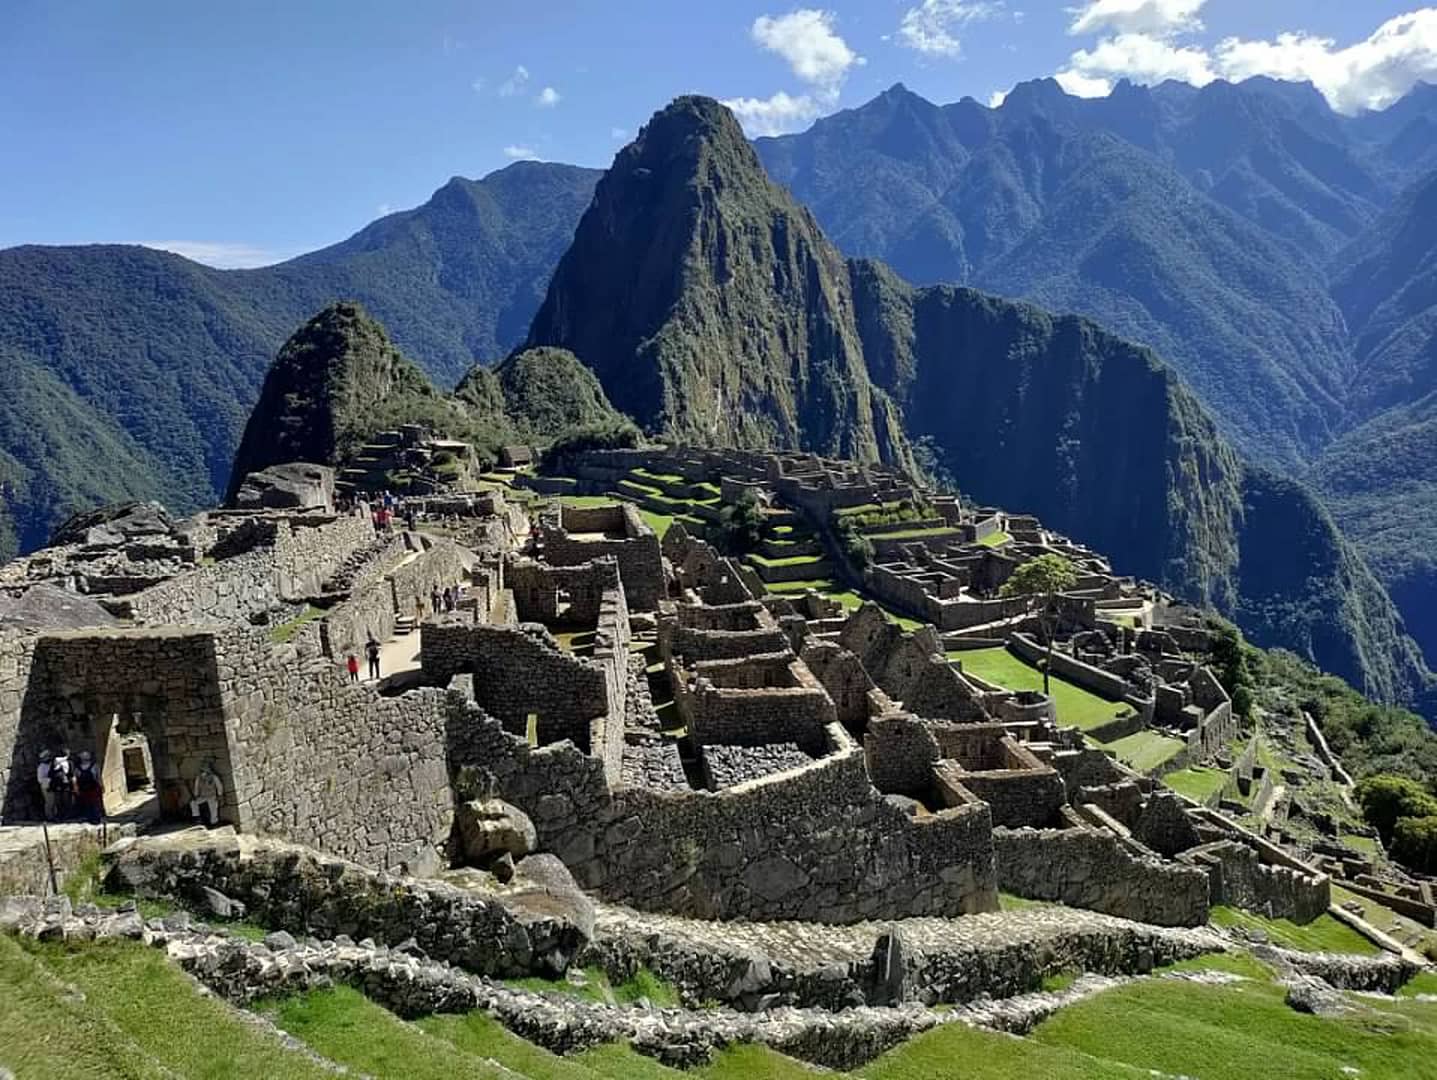 view of Machu Picchu as seen from above